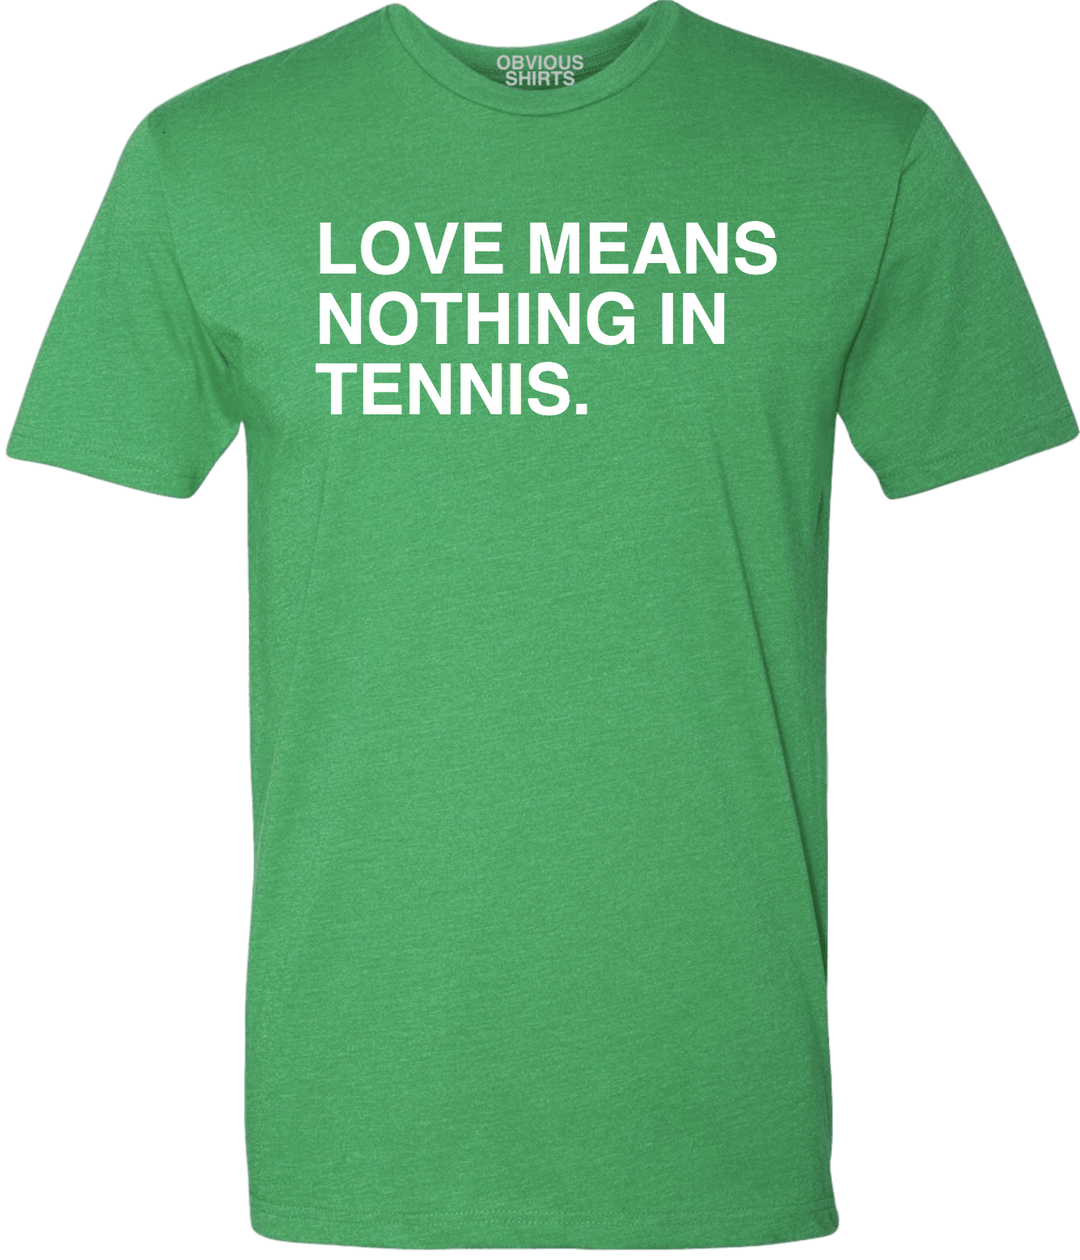 LOVE MEANS NOTHING IN TENNIS. - OBVIOUS SHIRTS.